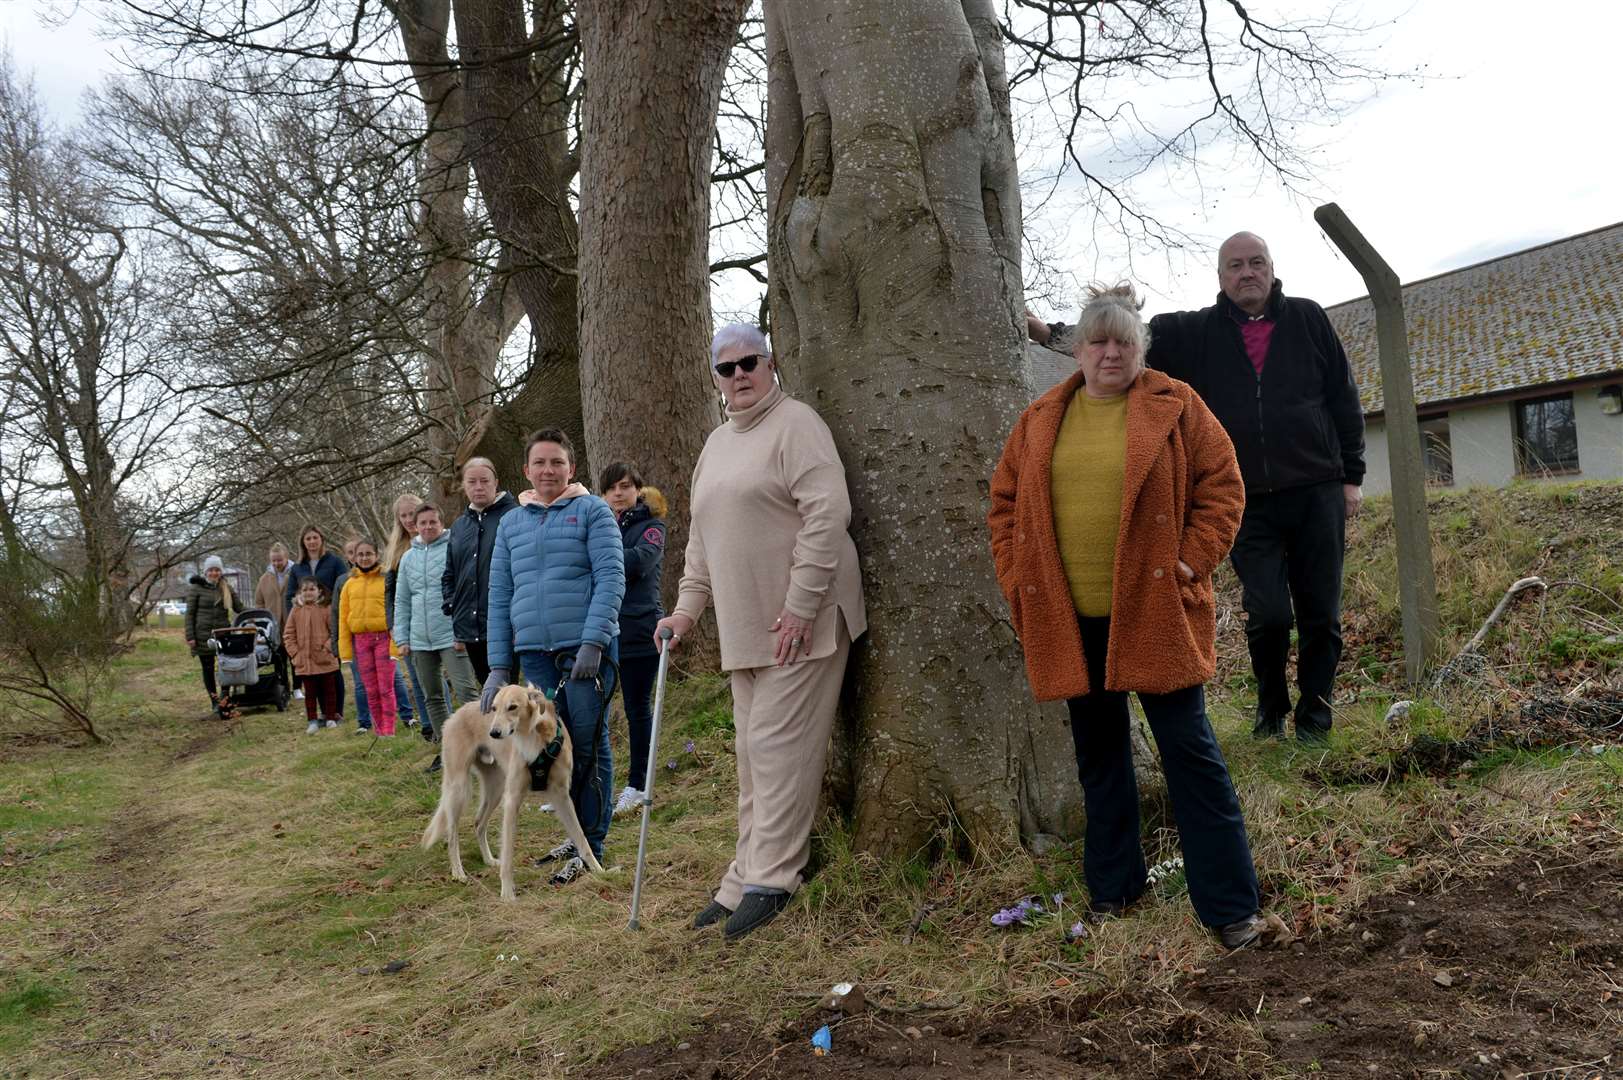 Residents are upset that trees between Raigmore estate and the hospital are to be cut down to create a bus link.